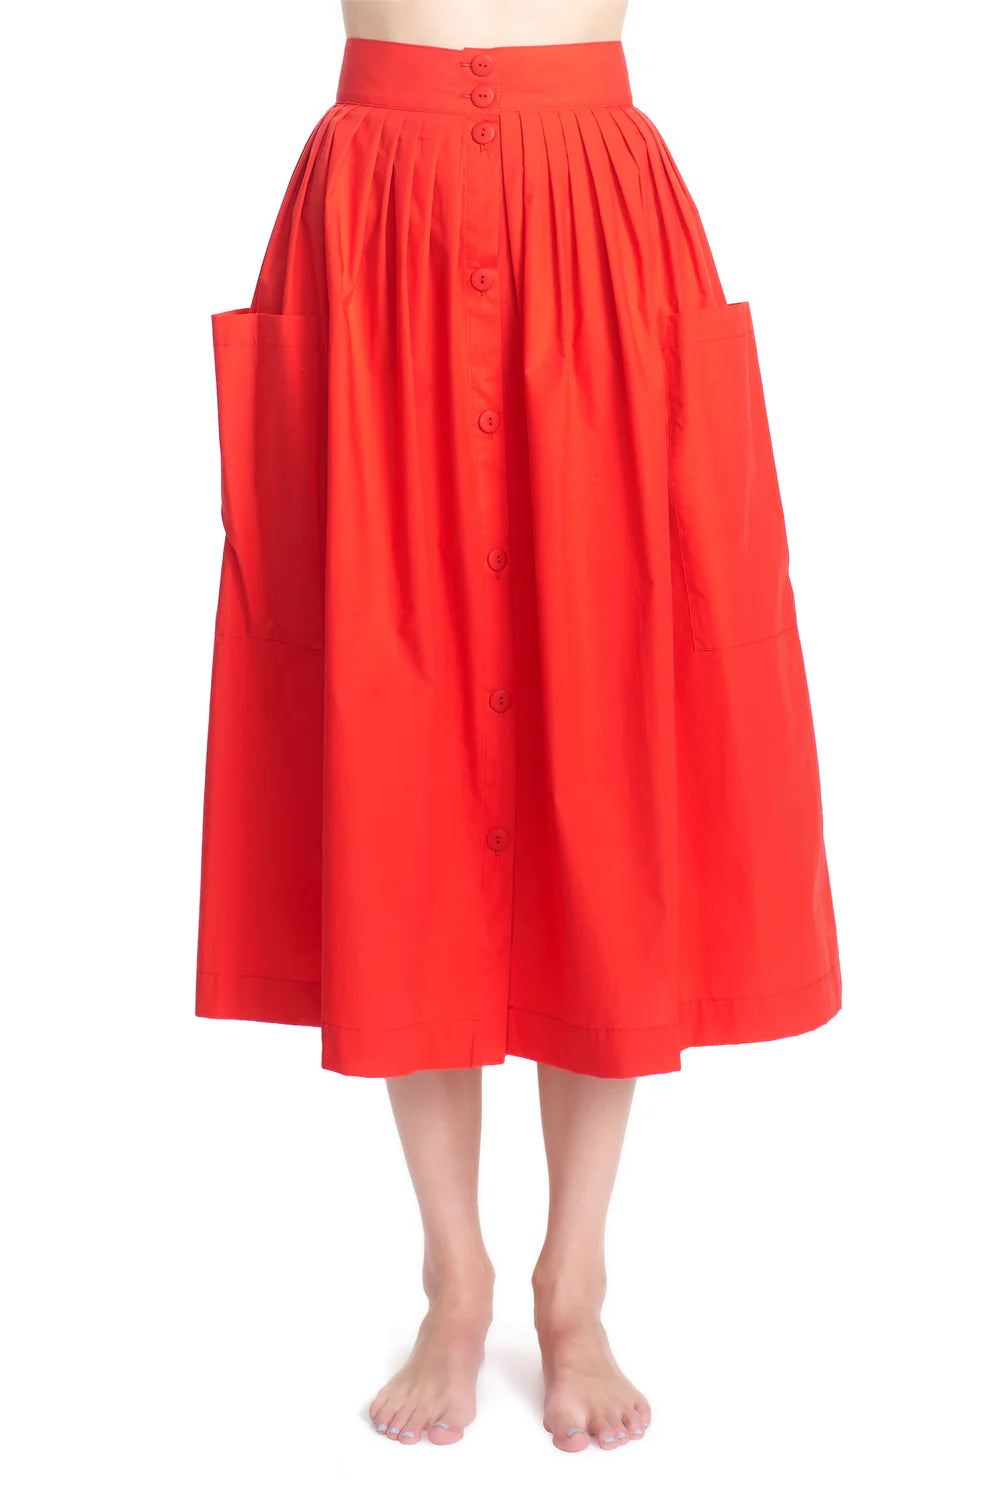 Corey Lynn Calter Cecilia Skirt in Lobster or Black - clever alice